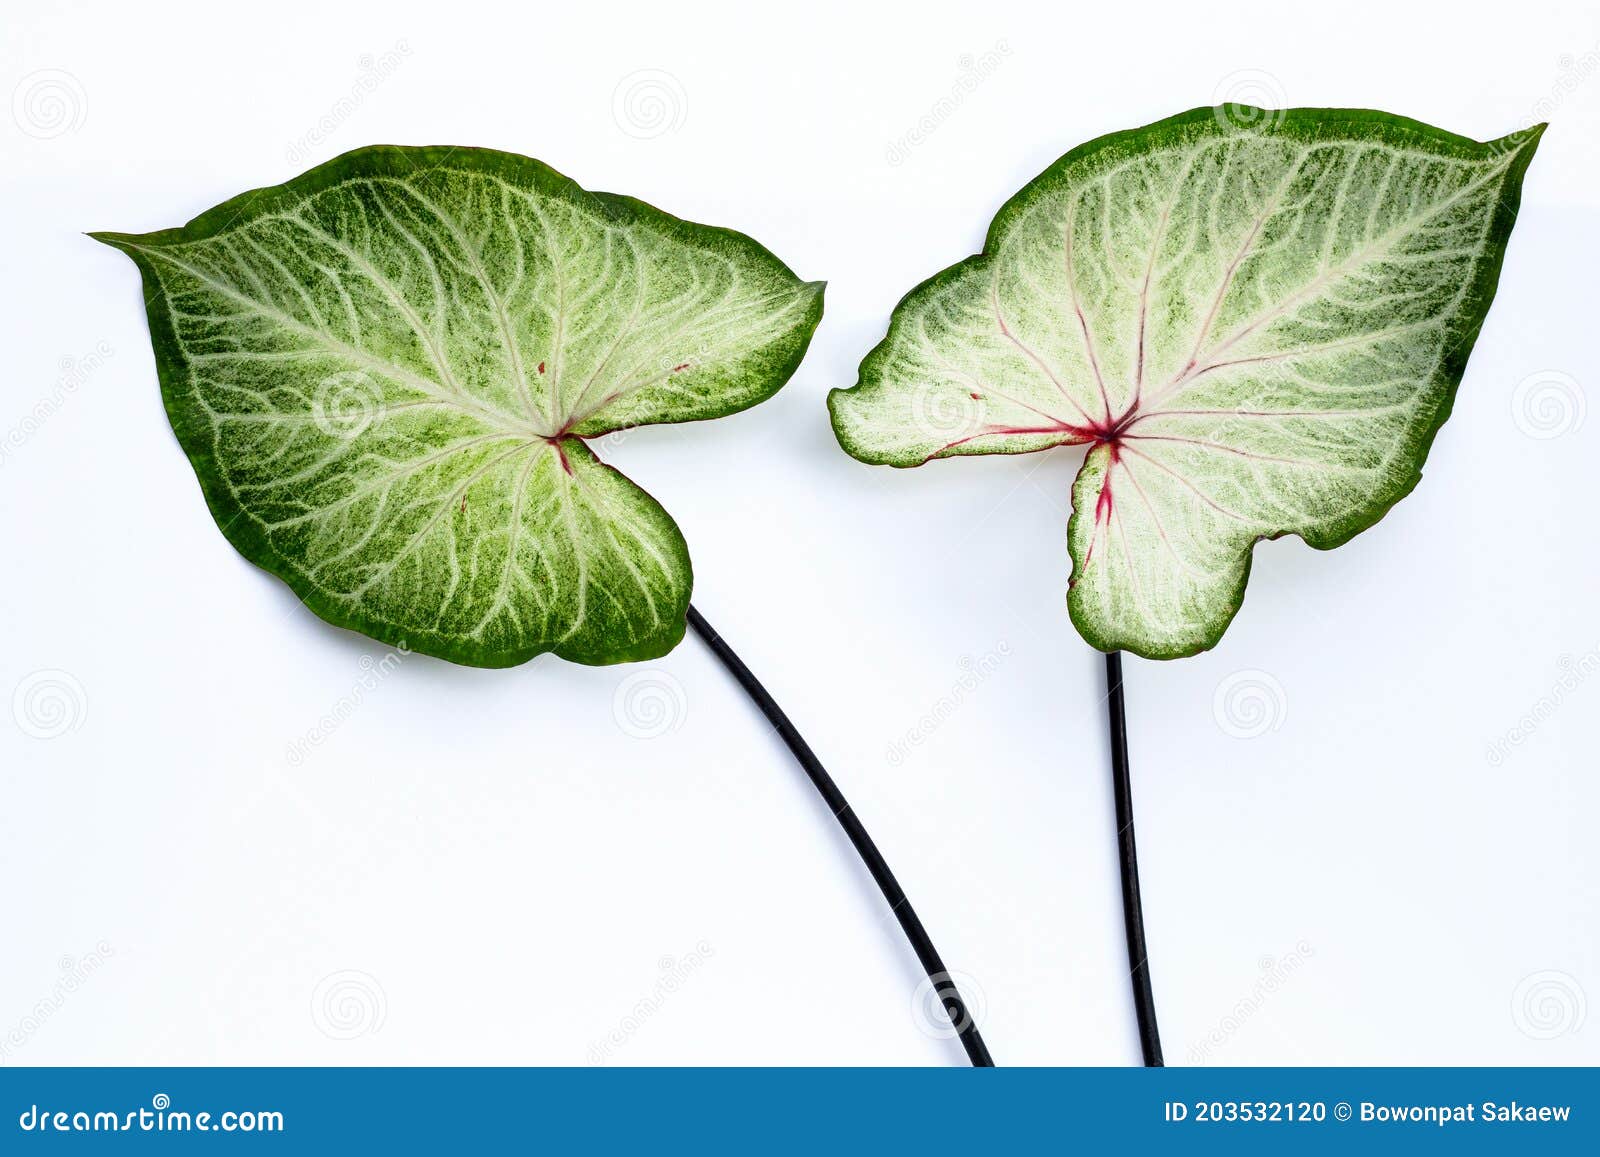 Caladium Leaves on White Background. Top View Stock Photo - Image of ...